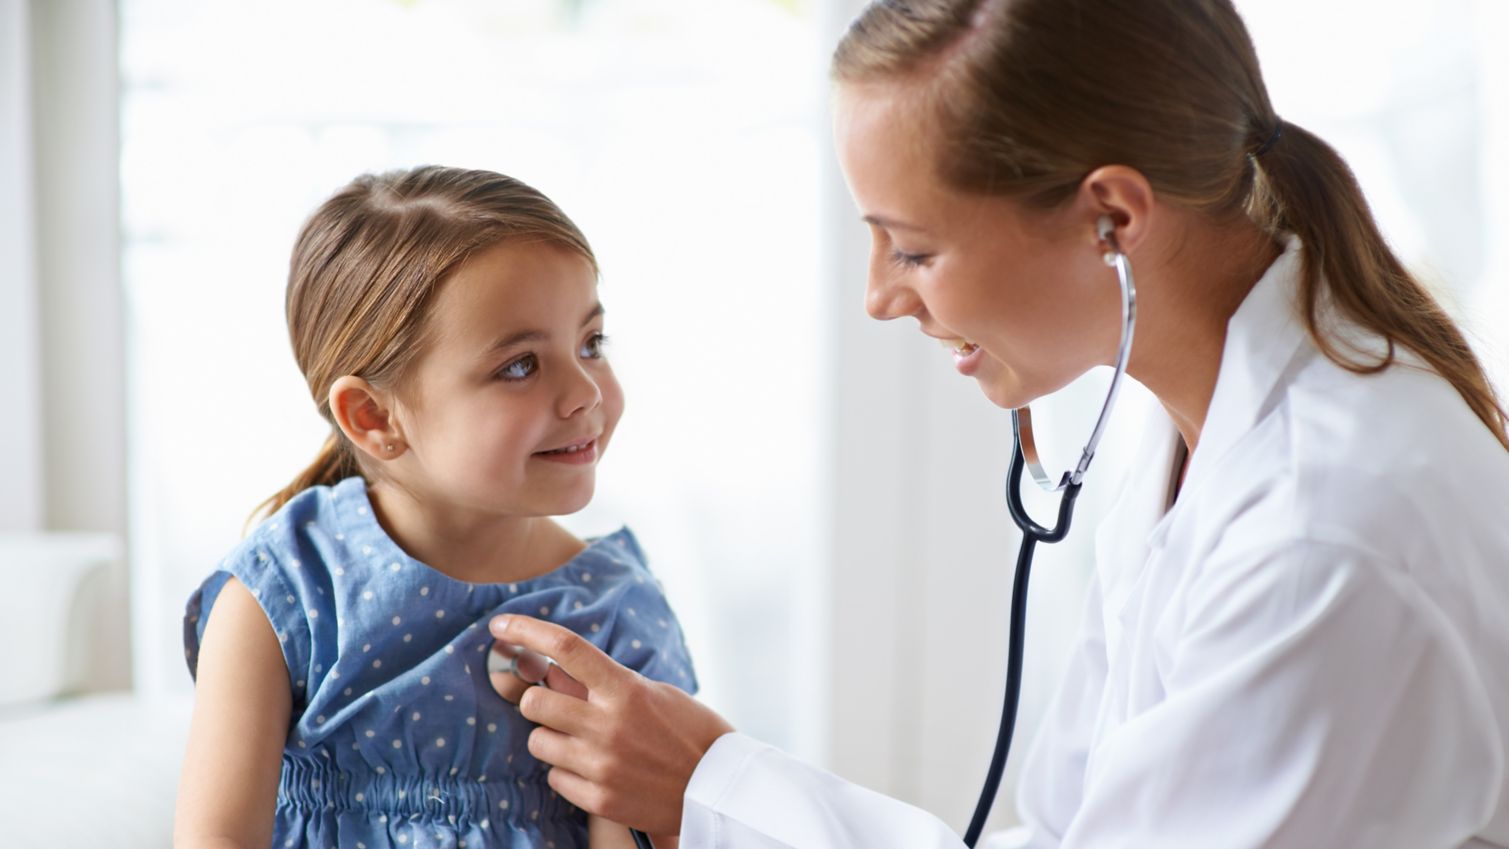 Young girl gets a checkup from the doctor